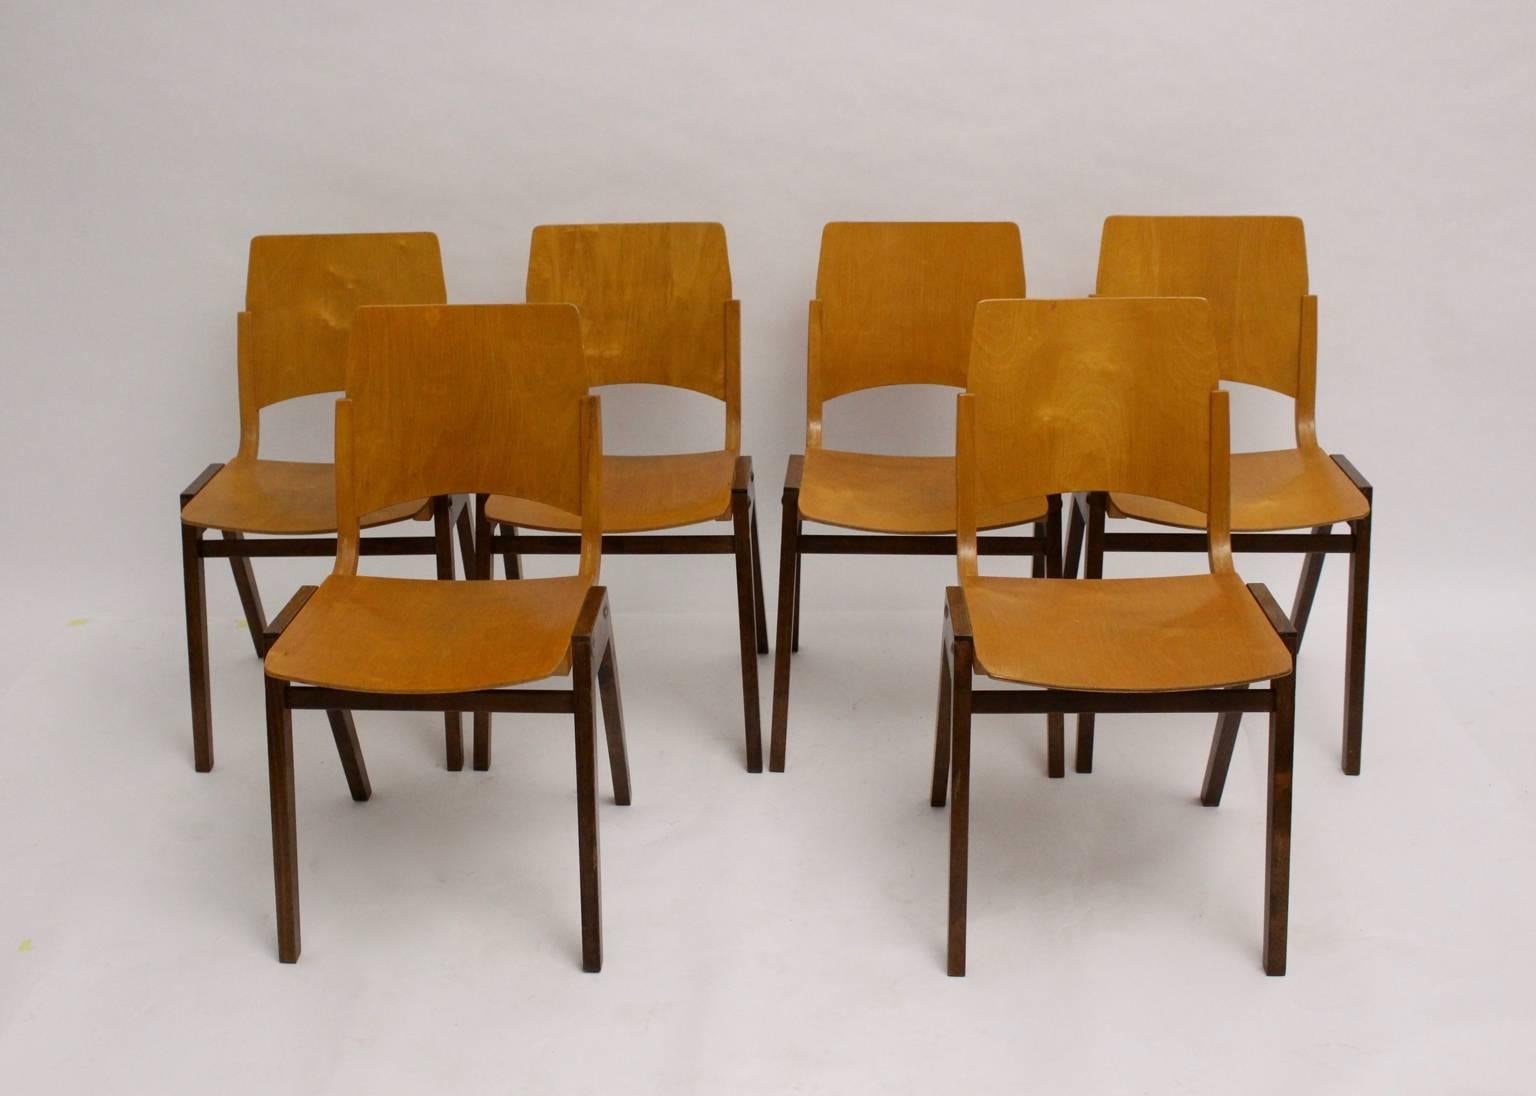 Mid Century Modern vintage timeless design chairs or dining chairs designed by Roland Rainer for the Viennese Stadthalle 1952.
Executed by Emil & Alfred Pollak, Vienna
Made of solid beechwood base and brown stained
The seat and the back were made of